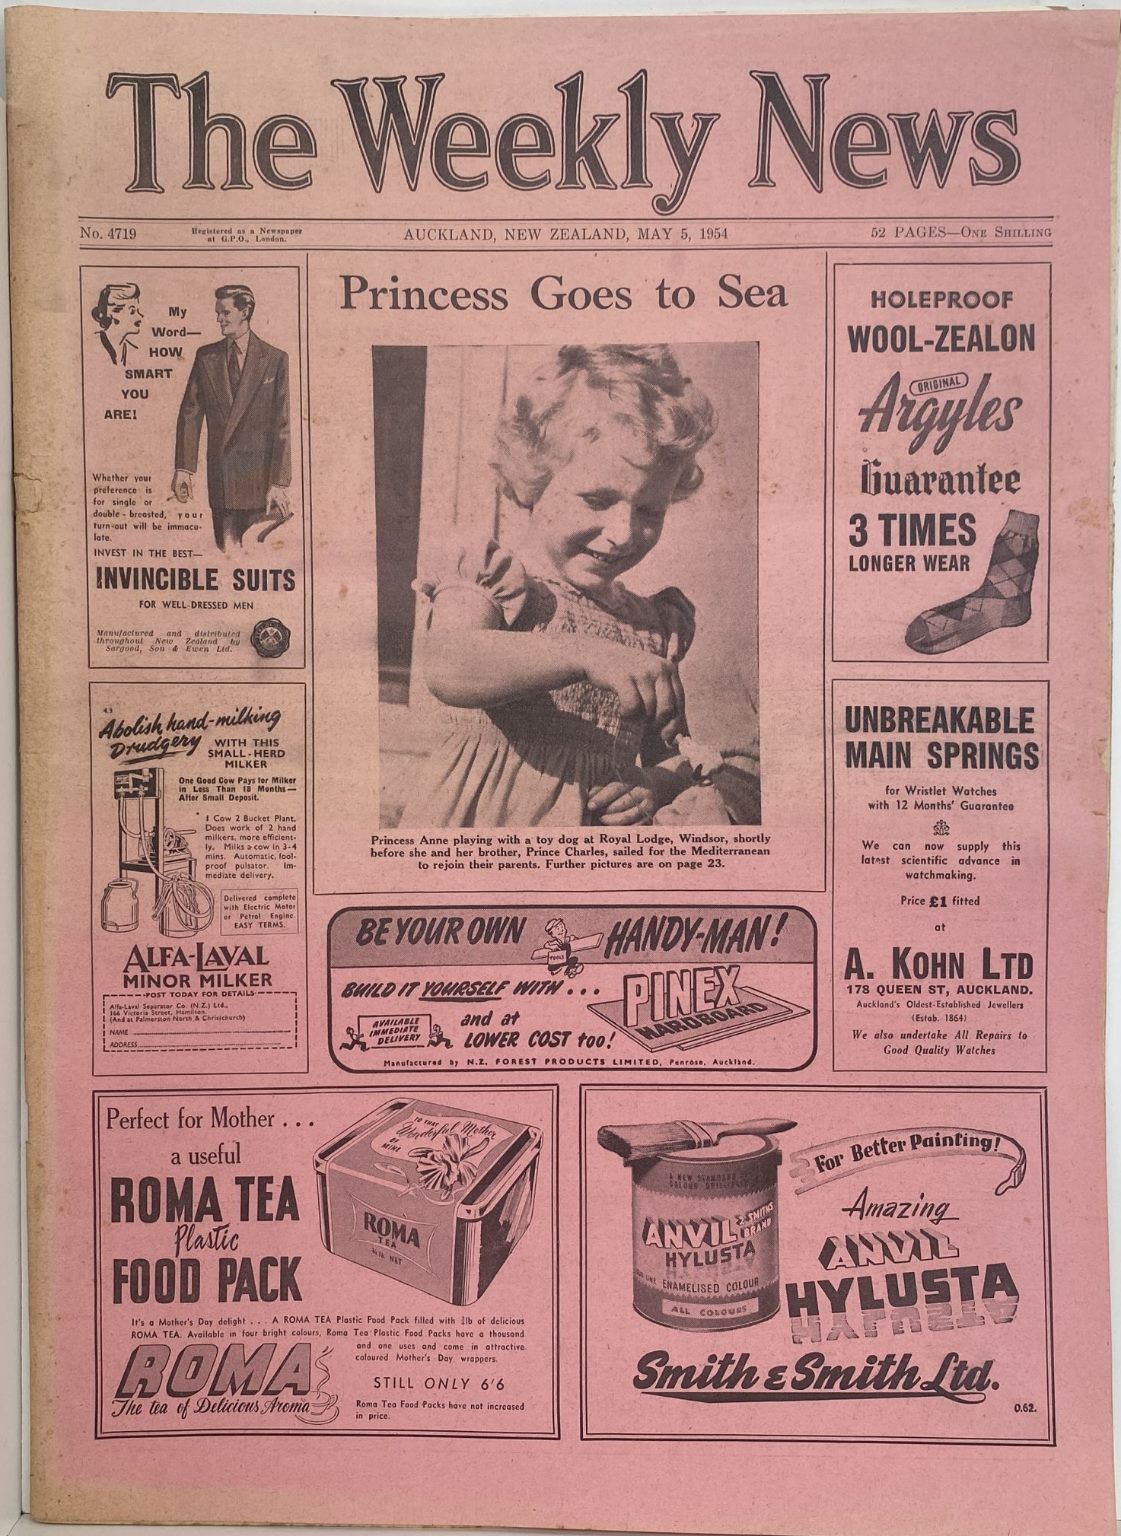 OLD NEWSPAPER: The Weekly News - No. 4719, 5 May 1954